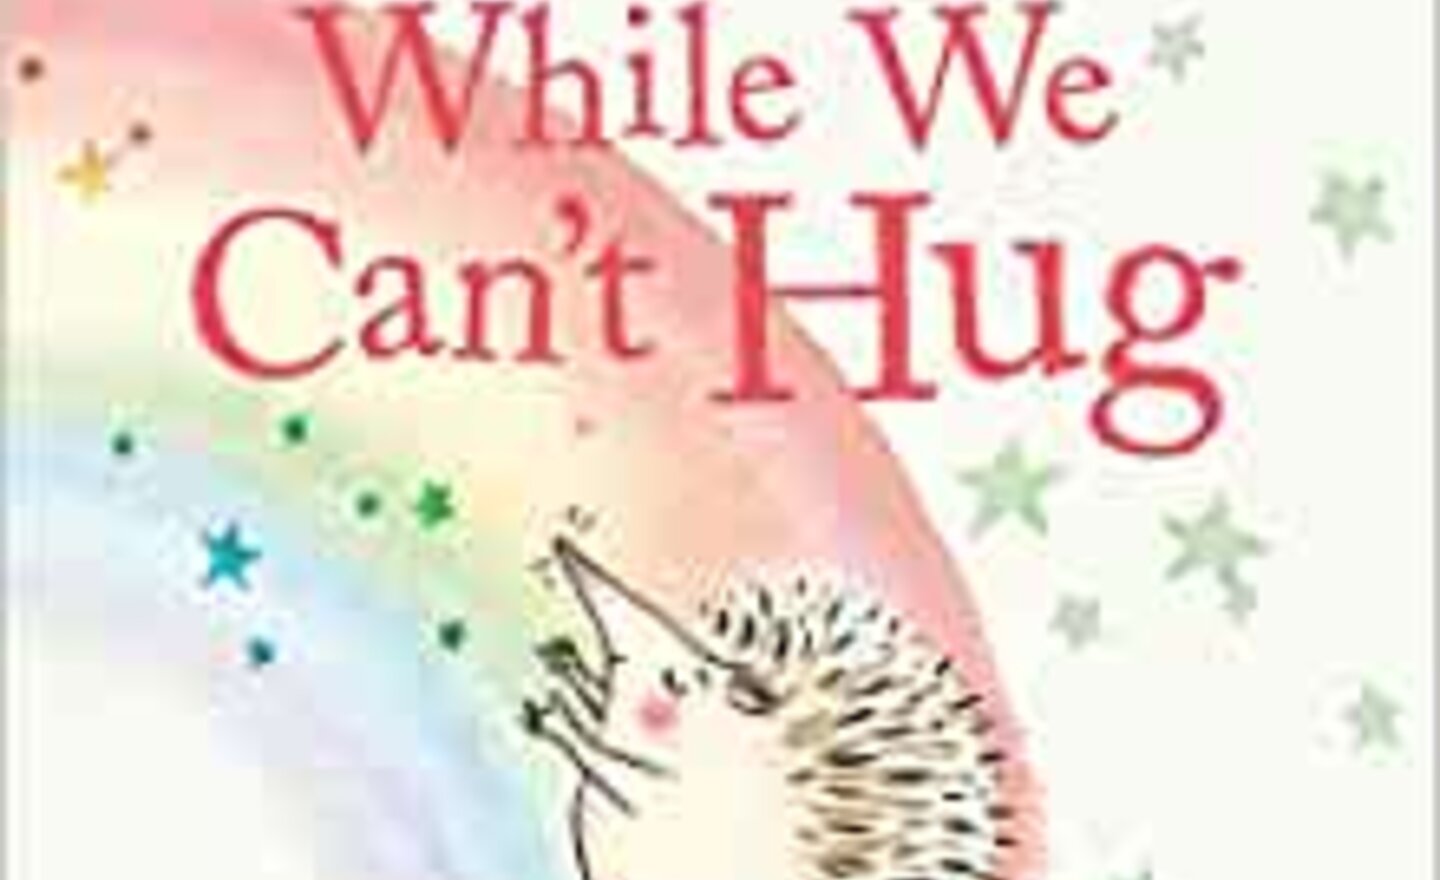 Image of While we can't hug................